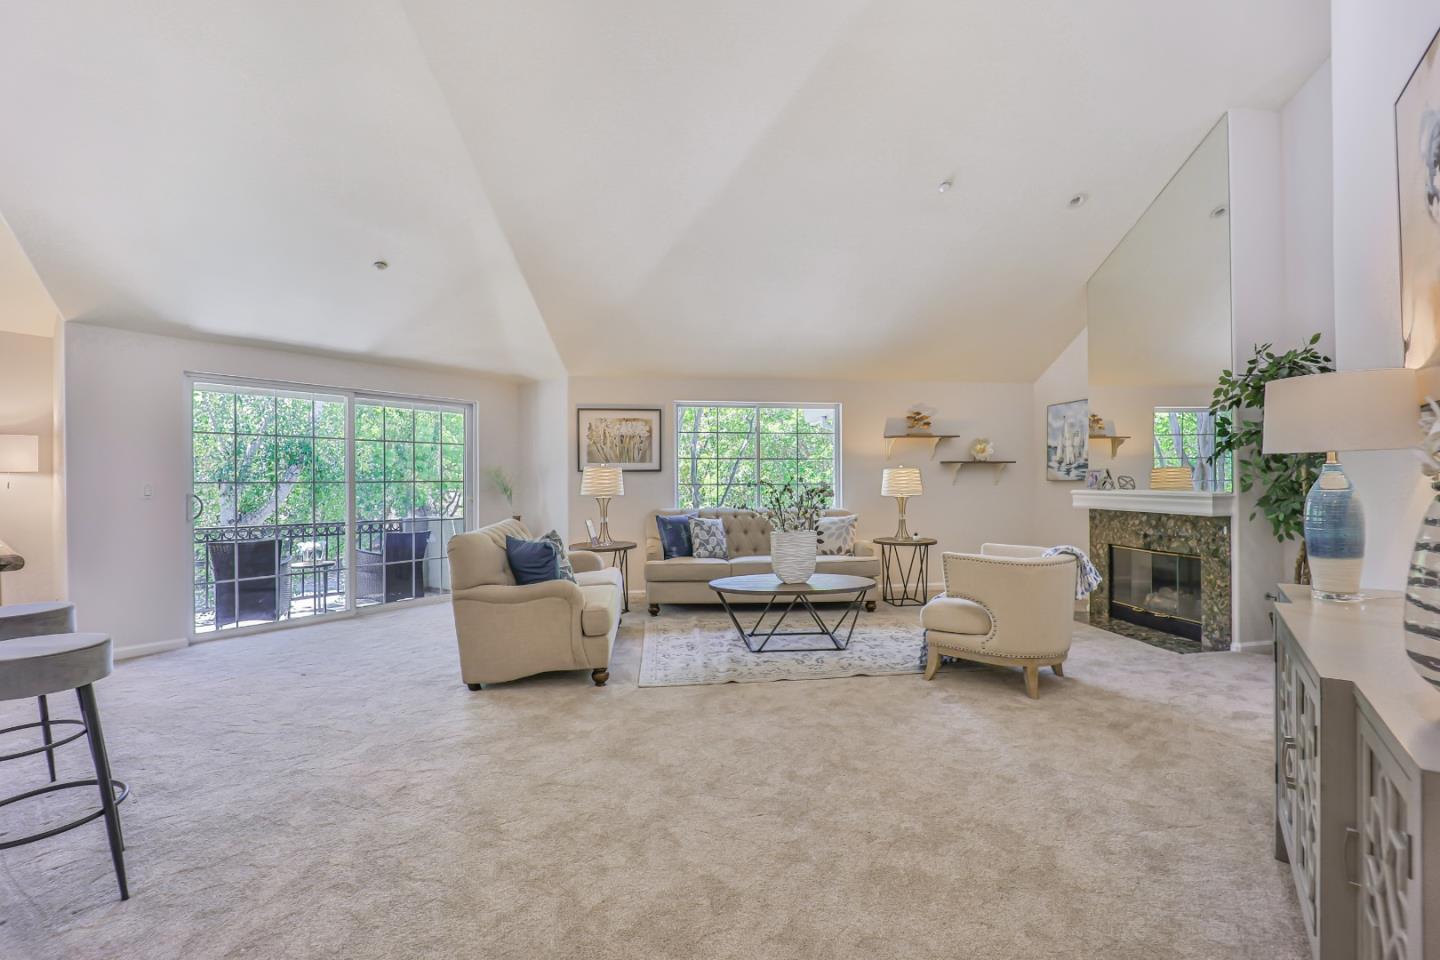 A luxurious condo in the sought-after Linfield Oaks neighborhood of Menlo Park. Enter a spacious living area with a vaulted ceiling, recessed lighting, a grand fireplace and sliding door entry to a sizable balcony overlooking lush green trees. Enjoy a bright & airy kitchen with granite countertops, breakfast bar seating, and beautiful wood cabinetry that carries over into the open dining area. The bedrooms are both well-proportioned with plenty of closet space to satisfy your needs. For added convenience, the Washer & Dryer are nicely located inside. The gated, secure building has a tastefully elegant entrance with a welcoming great room. The complex features, a beautiful swimming pool & spa, fitness center, library & game room, plus designated storage & bike storage area. Walk or bike to downtown Palo Alto and Menlo Park, Stanford University, commuter train stations, Burgess Park, top rated schools and so much more! Close to major freeways, shopping, restaurants & high-tech companies.